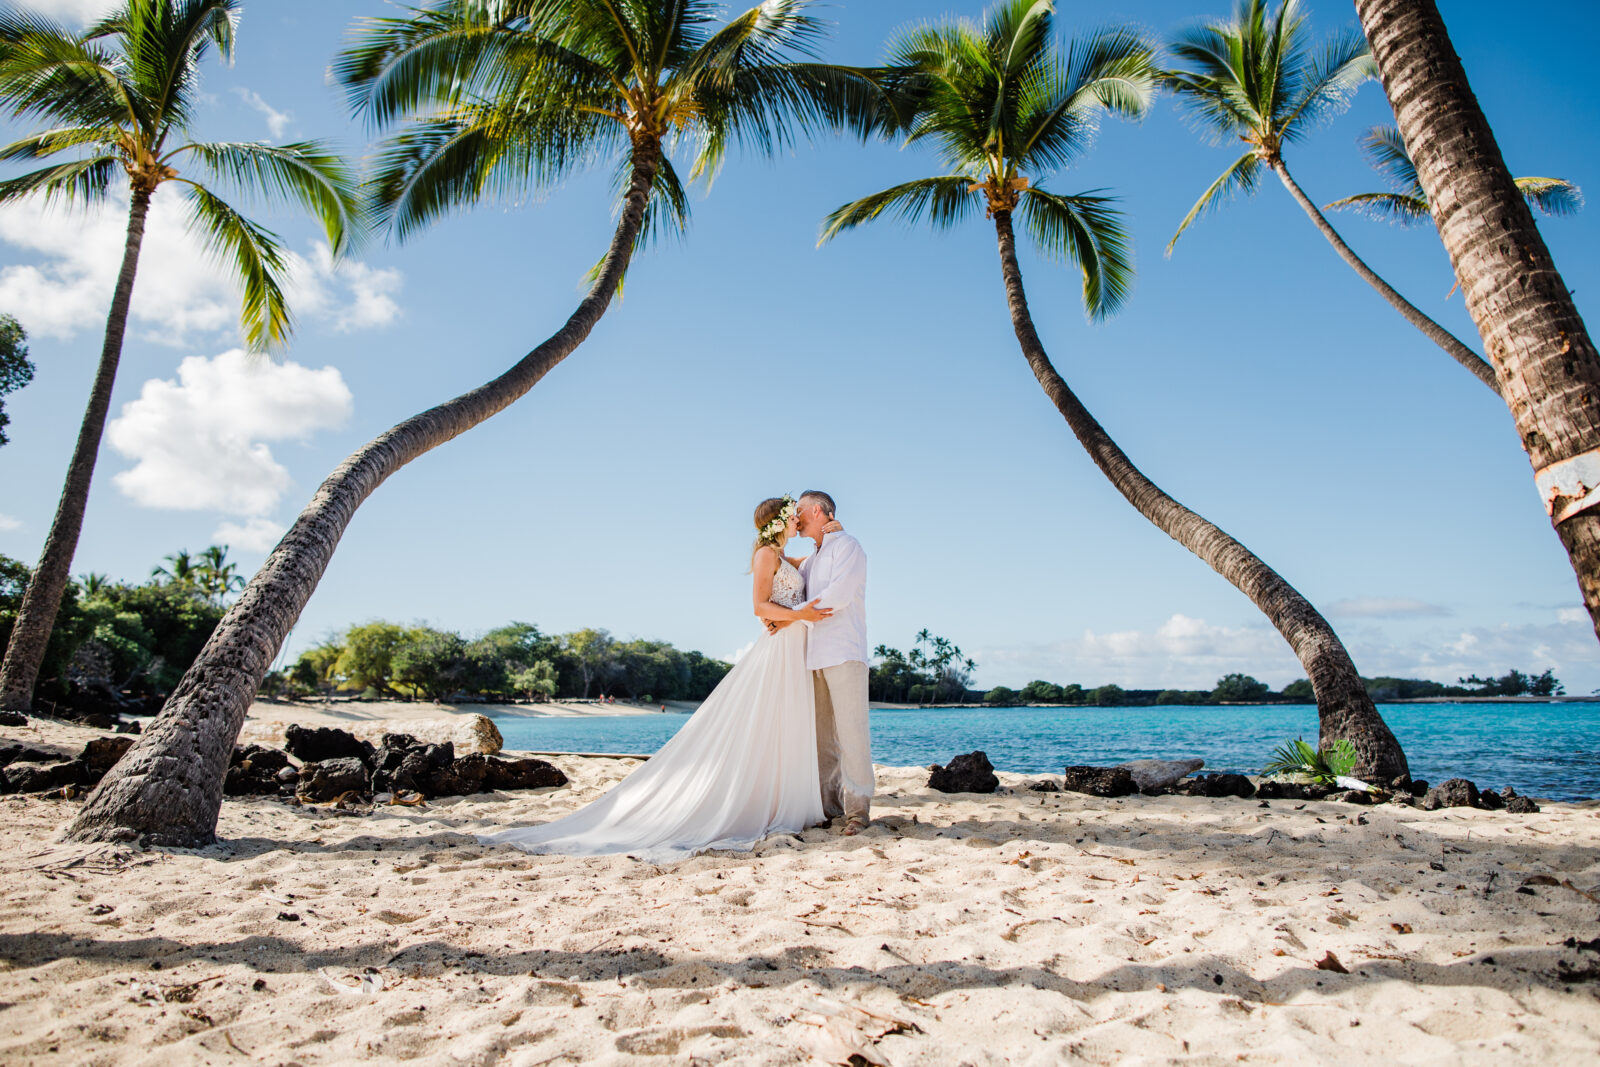 Between the palms, a couple on a secluded beach after their Big Island elopement.